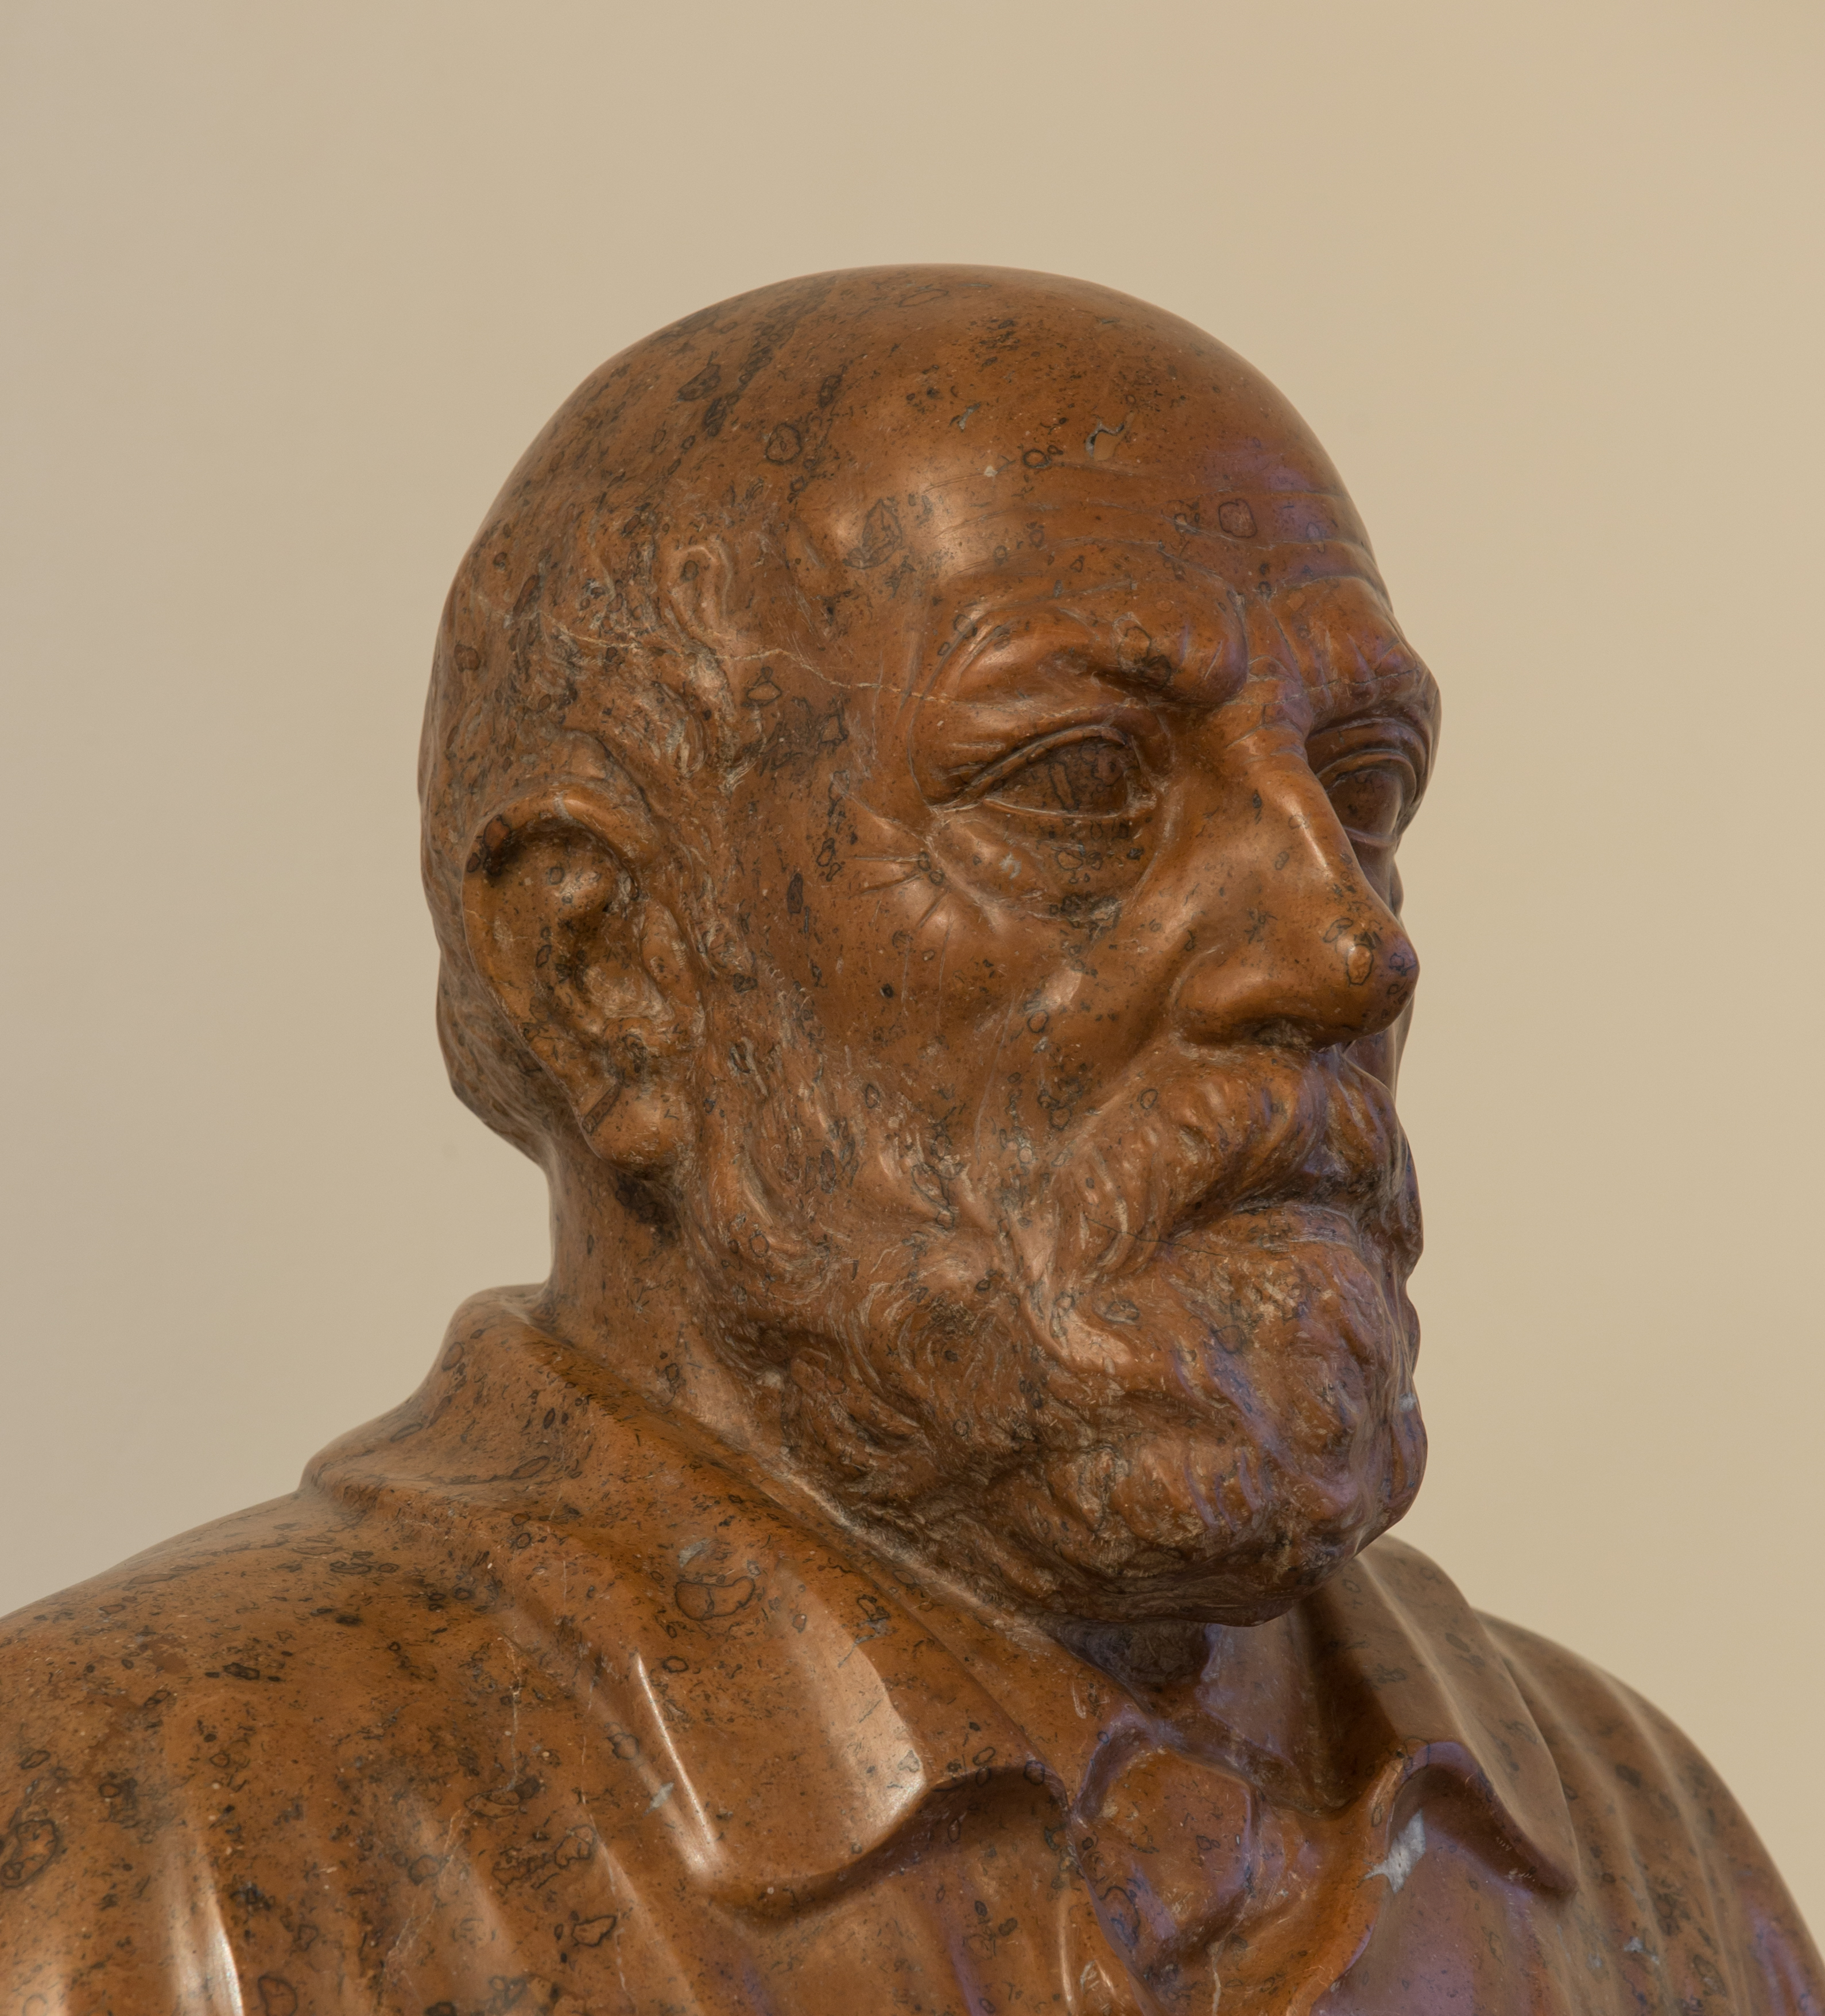 Eduard Suess - Bust in the Aula of the Academy of Sciences, Vienna - hu - 8498